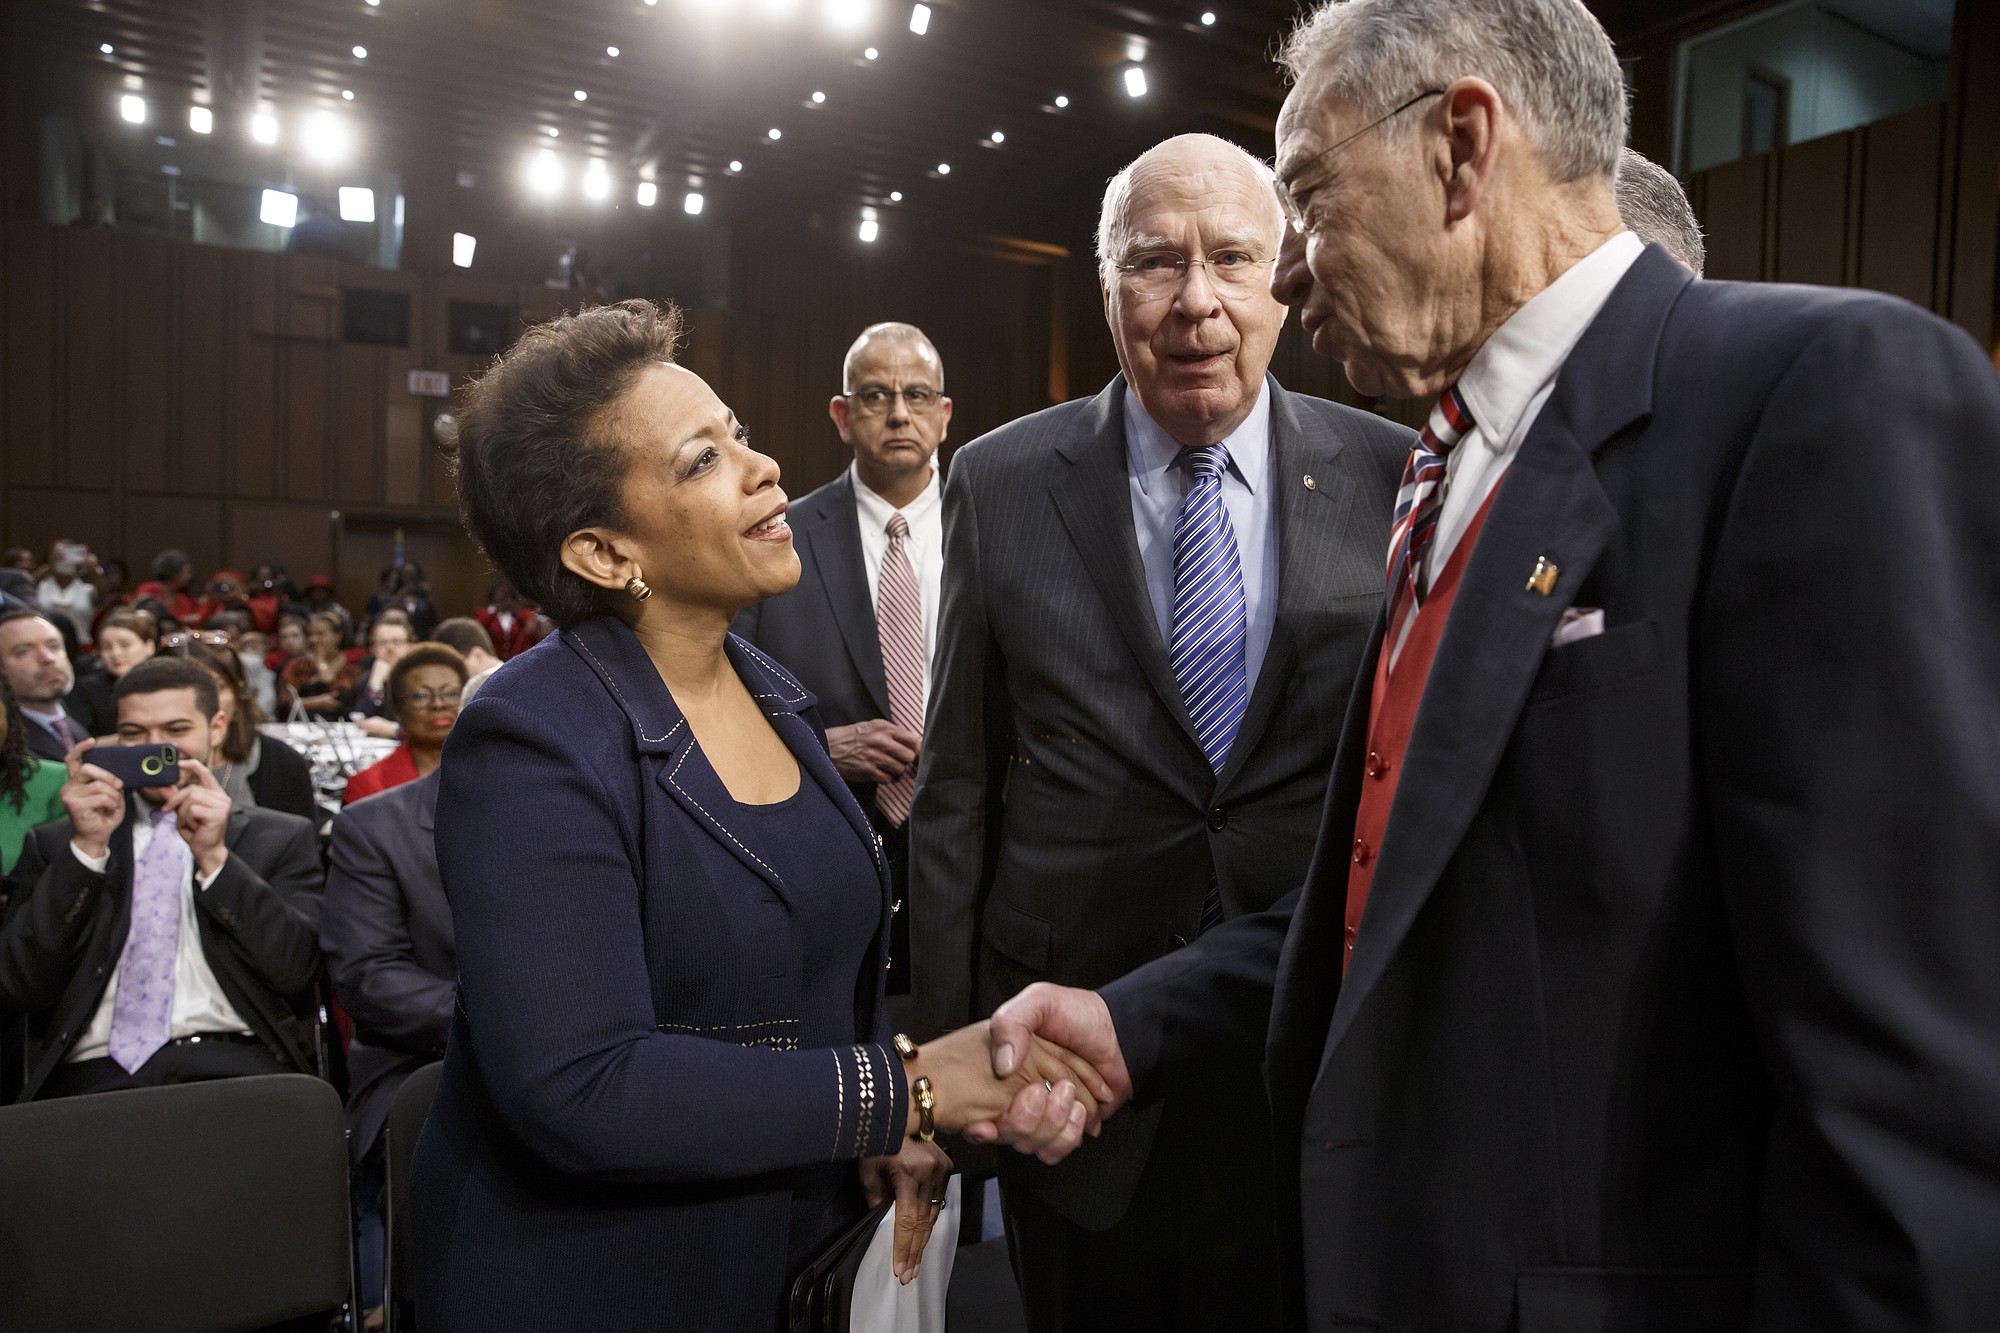 Senate Judiciary Committee Chairman Sen. Charles Grassley, R-Iowa, right, accompanied by the committee's ranking member, Sen. Patrick Leahy, D-Vt., center, greets Attorney general nominee Loretta Lynch on Capitol Hill in Washington in January before the start of her confirmation hearing before the committee.